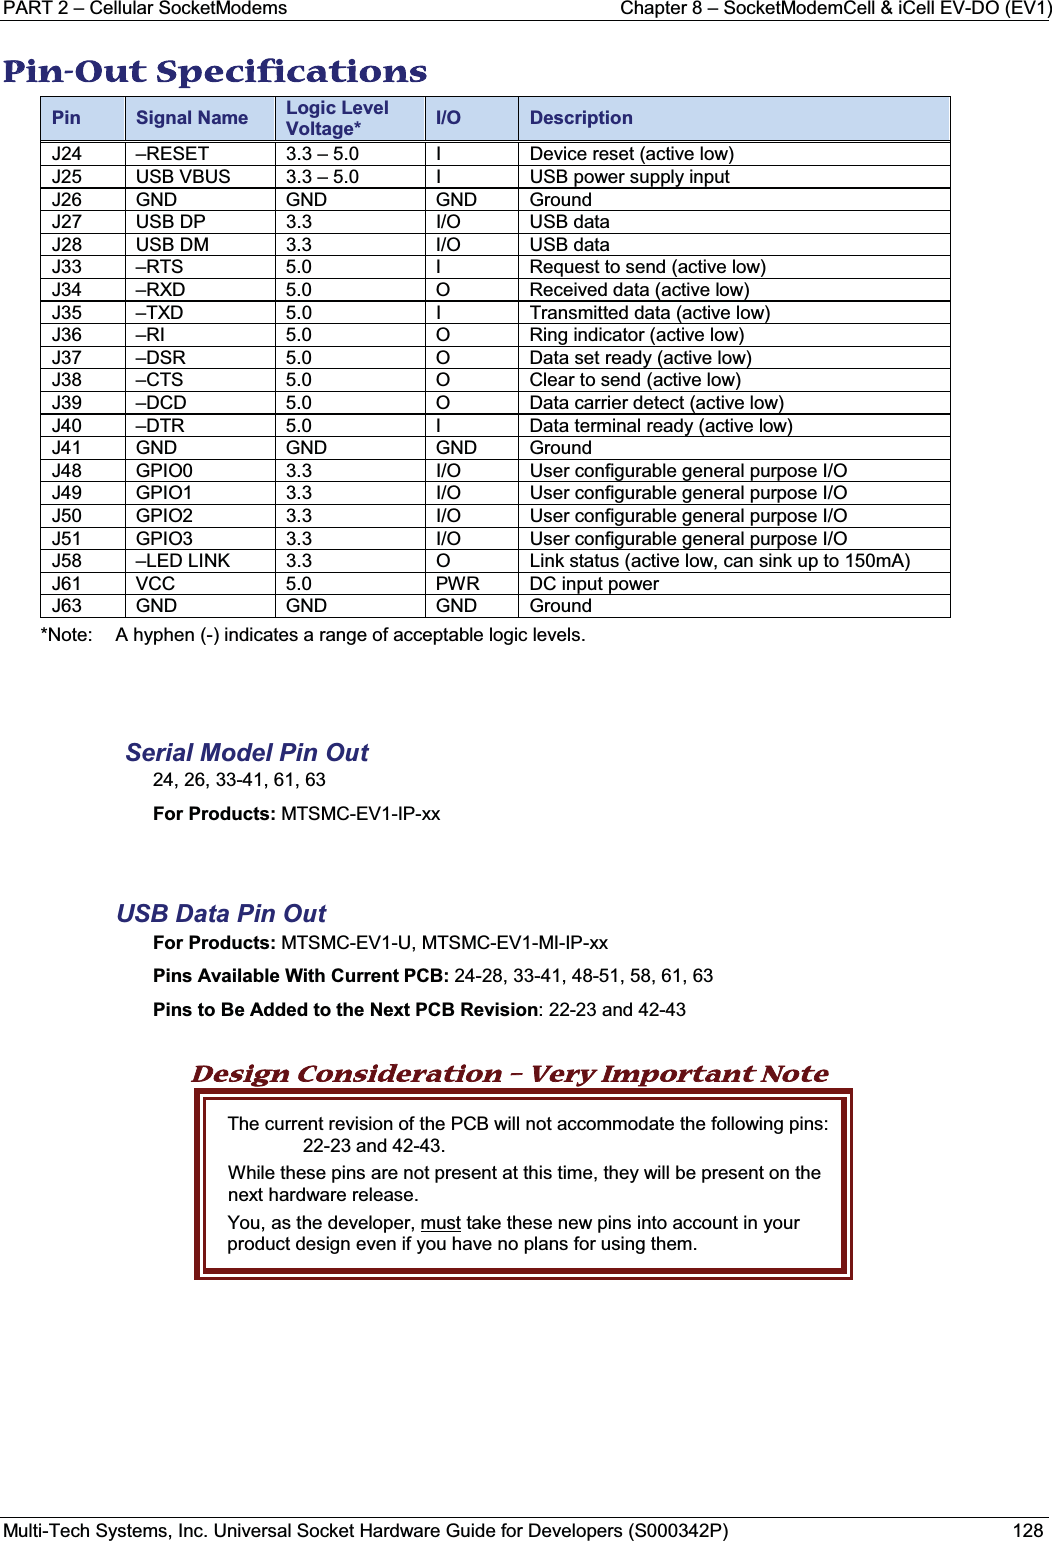 PART 2 – Cellular SocketModems Chapter 8 – SocketModemCell &amp; iCell EV-DO (EV1)Multi-Tech Systems, Inc. Universal Socket Hardware Guide for Developers (S000342P) 128PPin-Out Specifications  Pin Signal Name Logic Level Voltage* I/O DescriptionJ24 –RESET 3.3 – 5.0 I Device reset (active low)J25 USB VBUS 3.3 – 5.0 I USB power supply inputJ26 GND GND GND GroundJ27 USB DP 3.3 I/O USB dataJ28 USB DM 3.3 I/O USB dataJ33 –RTS 5.0 I Request to send (active low)J34 –RXD 5.0 O Received data (active low)J35 –TXD 5.0 I Transmitted data (active low)J36 –RI 5.0 O Ring indicator (active low)J37 –DSR 5.0 O Data set ready (active low)J38 –CTS 5.0 O Clear to send (active low)J39 –DCD 5.0 O Data carrier detect (active low)J40 –DTR 5.0 I Data terminal ready (active low)J41 GND GND GND GroundJ48 GPIO0 3.3 I/O User configurable general purpose I/OJ49 GPIO1 3.3 I/O User configurable general purpose I/OJ50 GPIO2 3.3 I/O User configurable general purpose I/OJ51 GPIO3 3.3 I/O User configurable general purpose I/OJ58 –LED LINK 3.3 O Link status (active low, can sink up to 150mA)J61 VCC 5.0 PWR DC input powerJ63 GND GND GND Ground*Note: A hyphen (-) indicates a range of acceptable logic levels.Serial Model Pin Out24, 26, 33-41, 61, 63For Products: MTSMC-EV1-IP-xxUSB Data Pin OutFor Products: MTSMC-EV1-U, MTSMC-EV1-MI-IP-xxPins Available With Current PCB: 24-28, 33-41, 48-51, 58, 61, 63Pins to Be Added to the Next PCB Revision: 22-23 and 42-43Design Consideration – Very Important Note The current revision of the PCB will not accommodate the following pins: 22-23 and 42-43. While these pins are not present at this time, they will be present on the next hardware release. You, as the developer, must take these new pins into account in your product design even if you have no plans for using them.